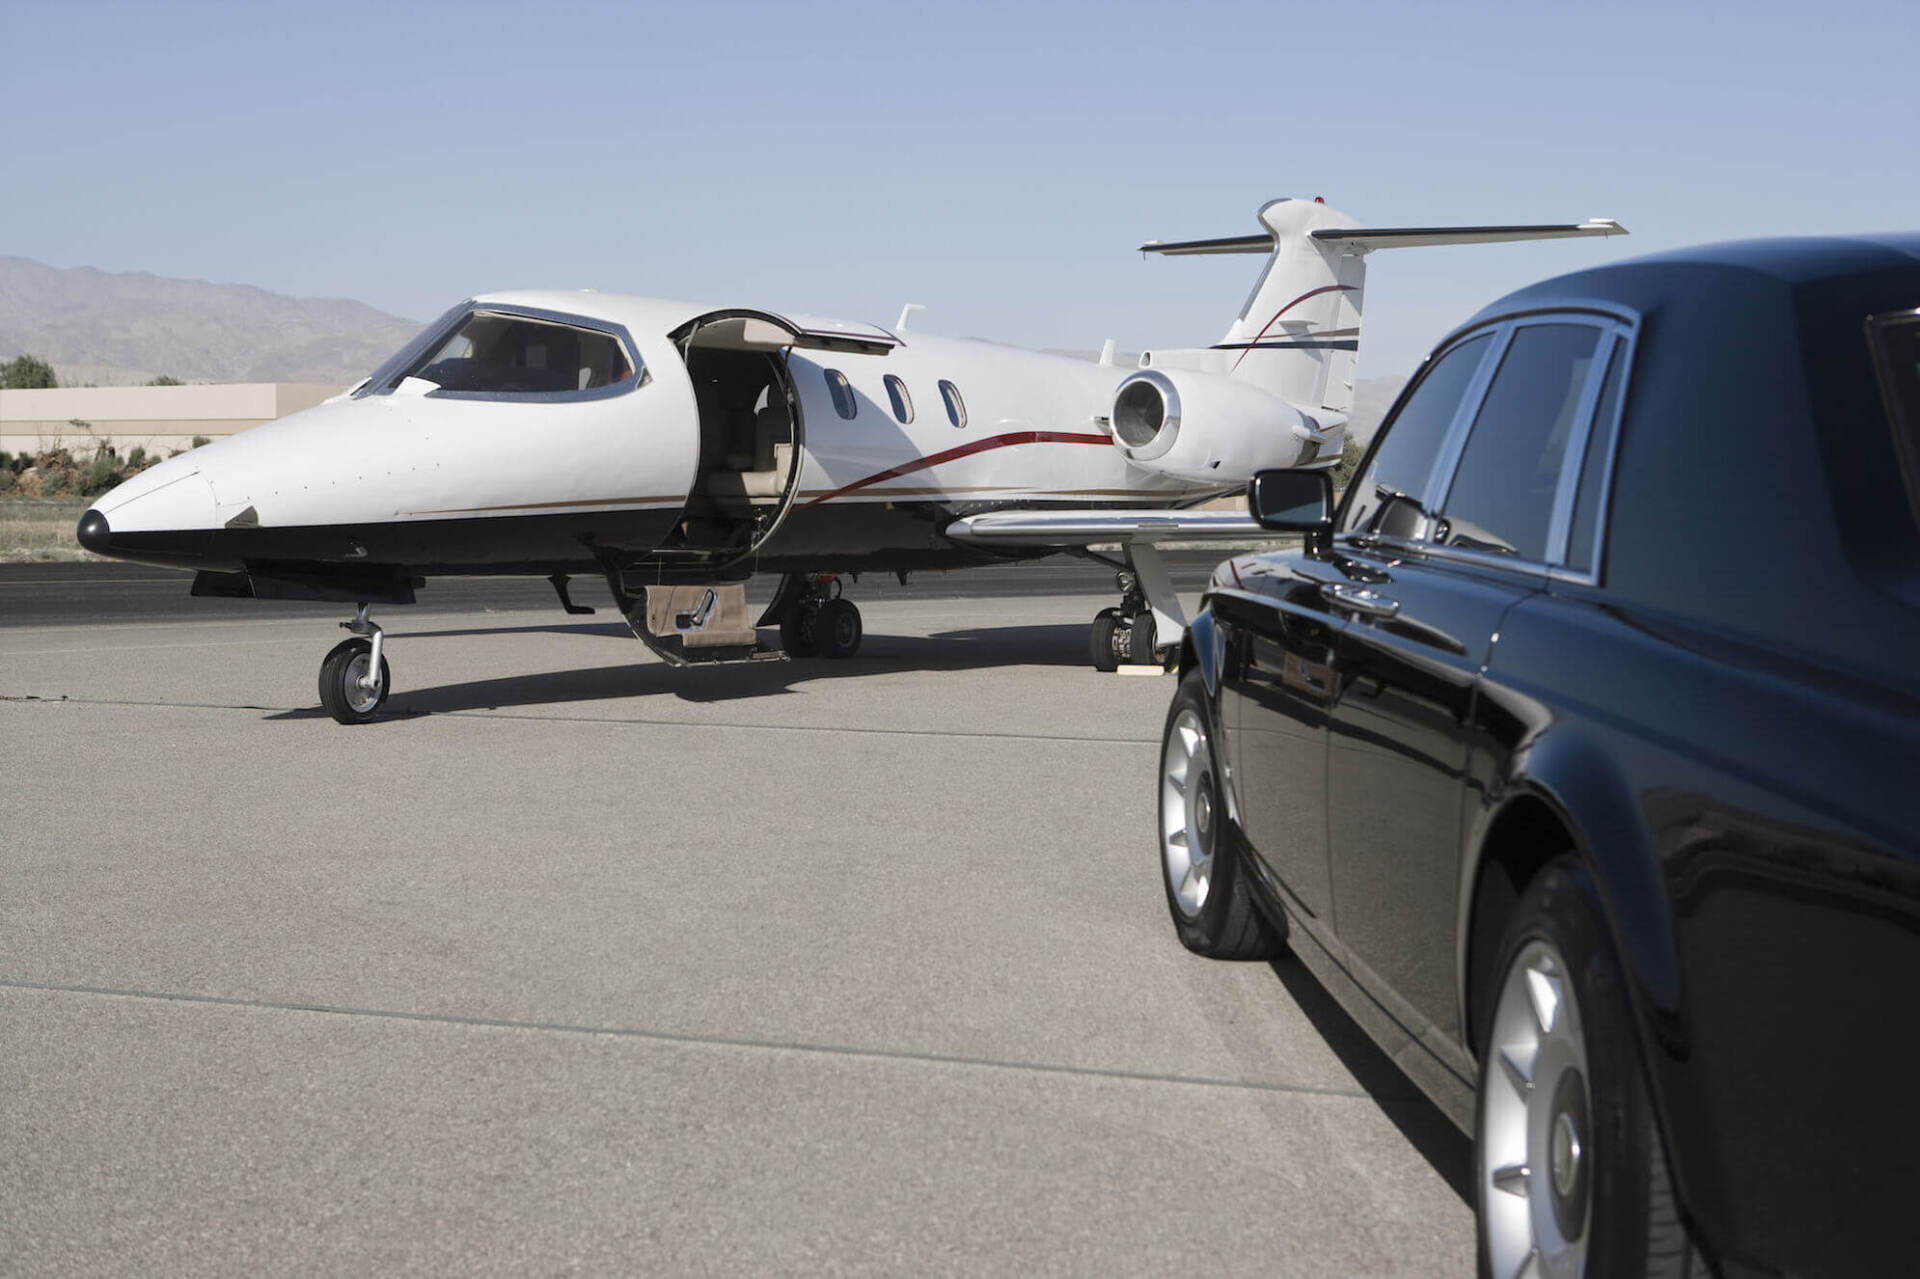 A private jet is parked next to a black car